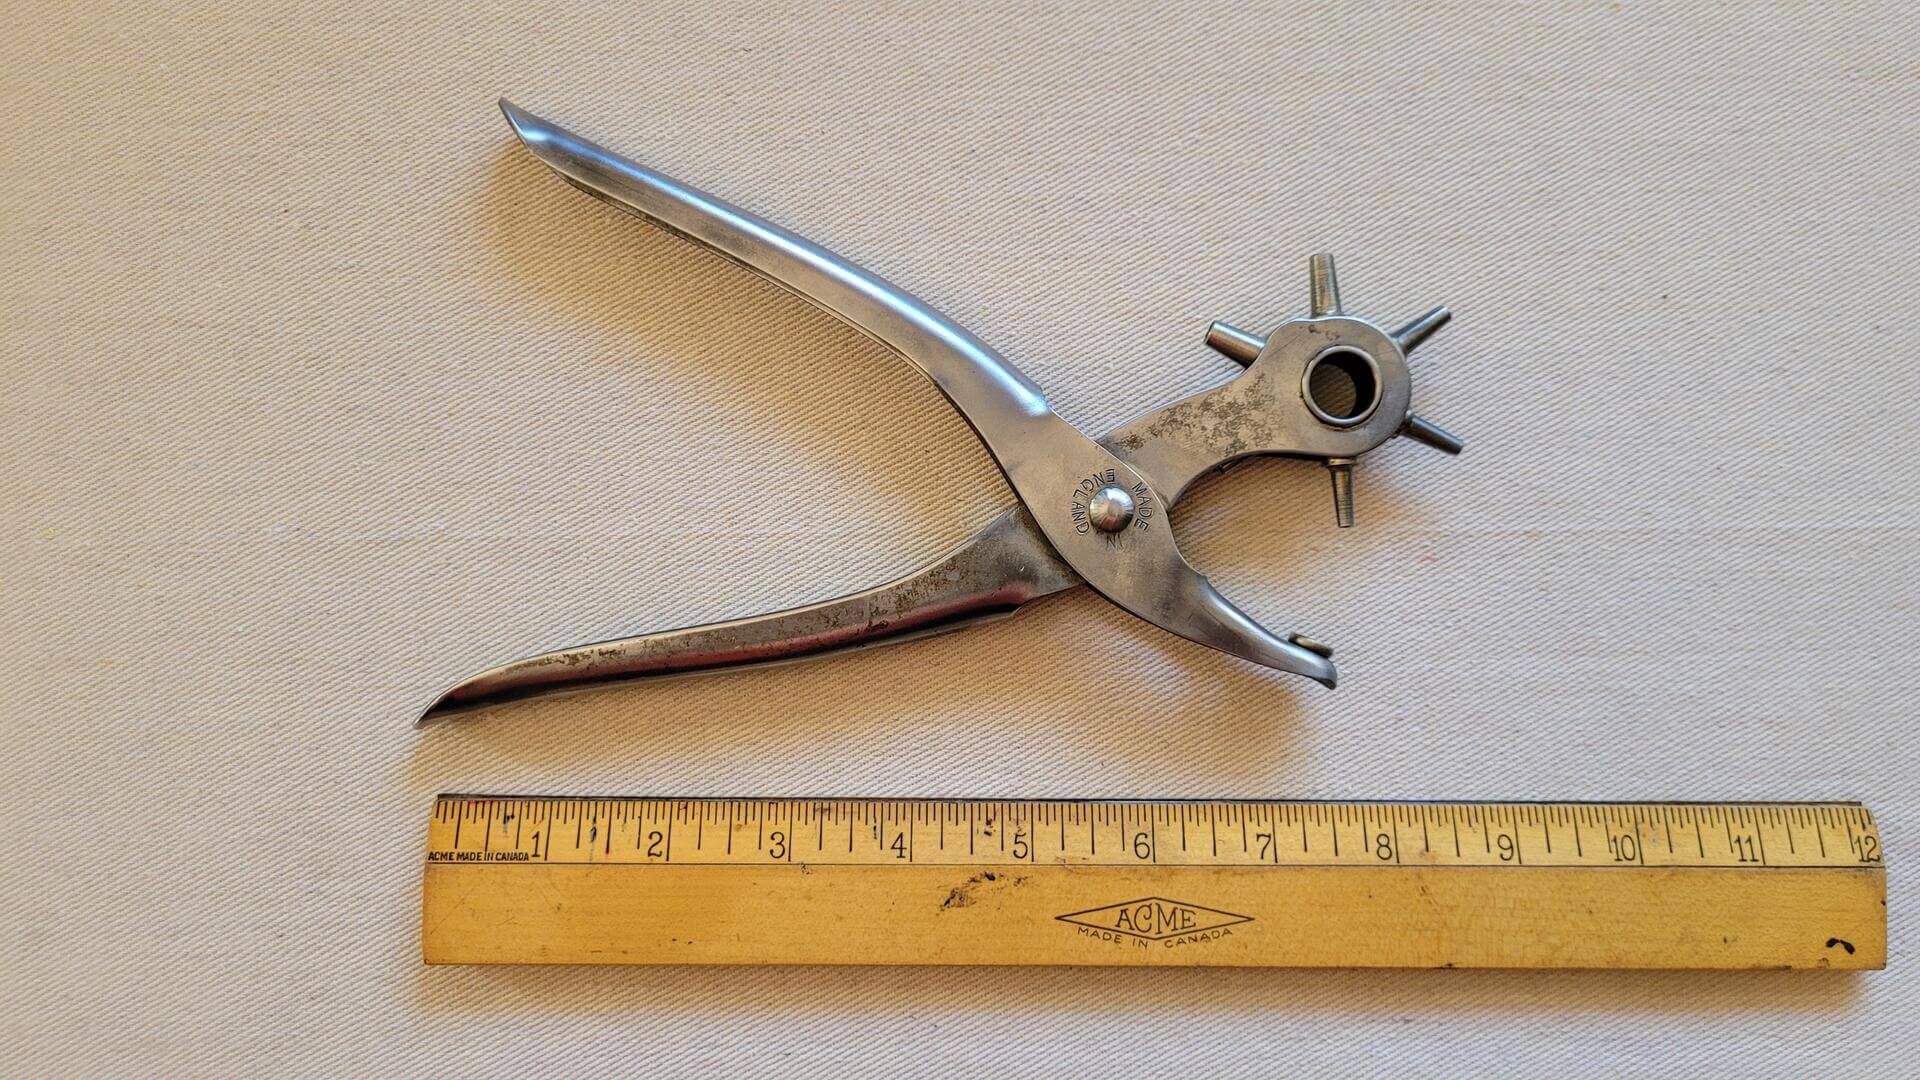 Vintage Mibro revolving leather hole punch pliers. Antique made in England collectible cobbler and leathermaking hand tool with 6 different punch size diameters